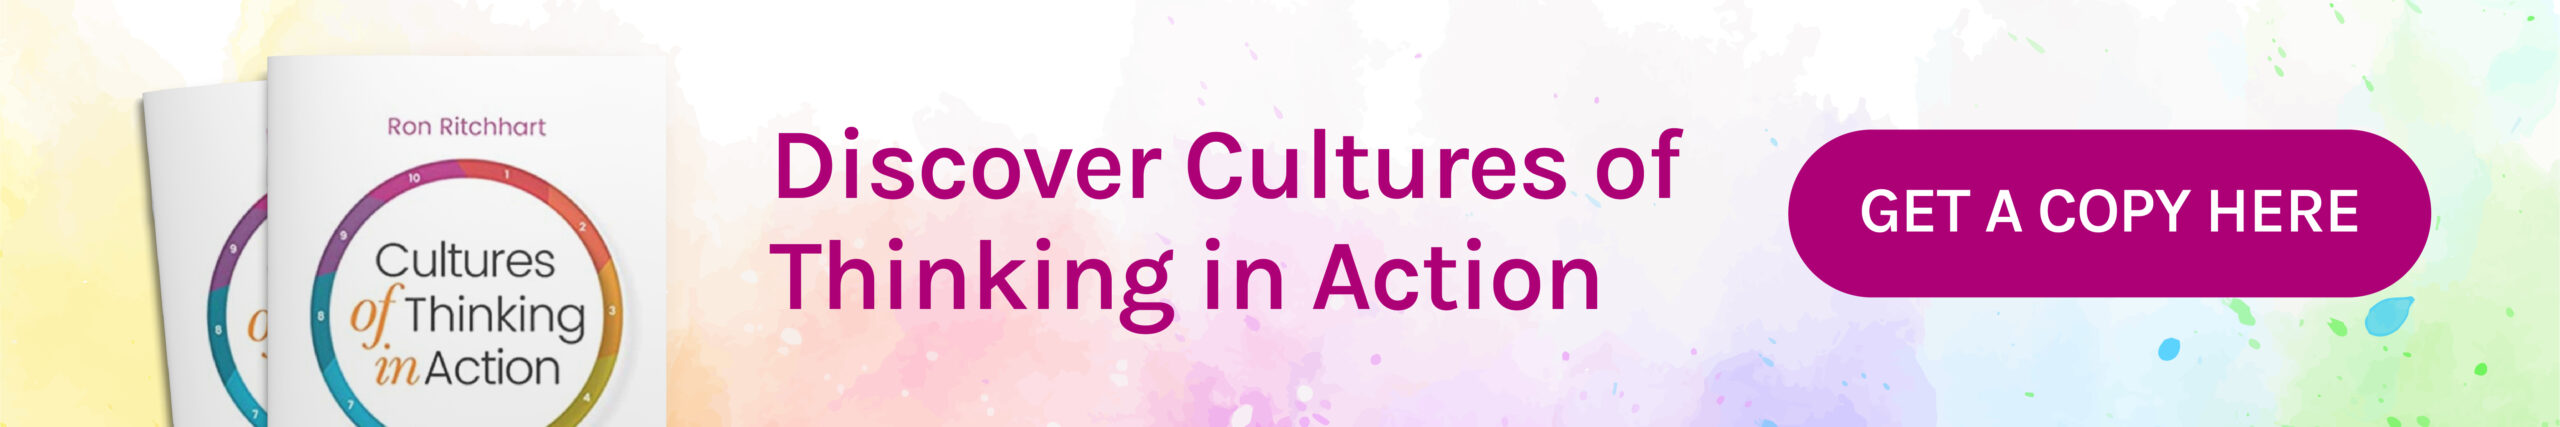 Discover Cultures of Thinking in Action Get a Copy Here